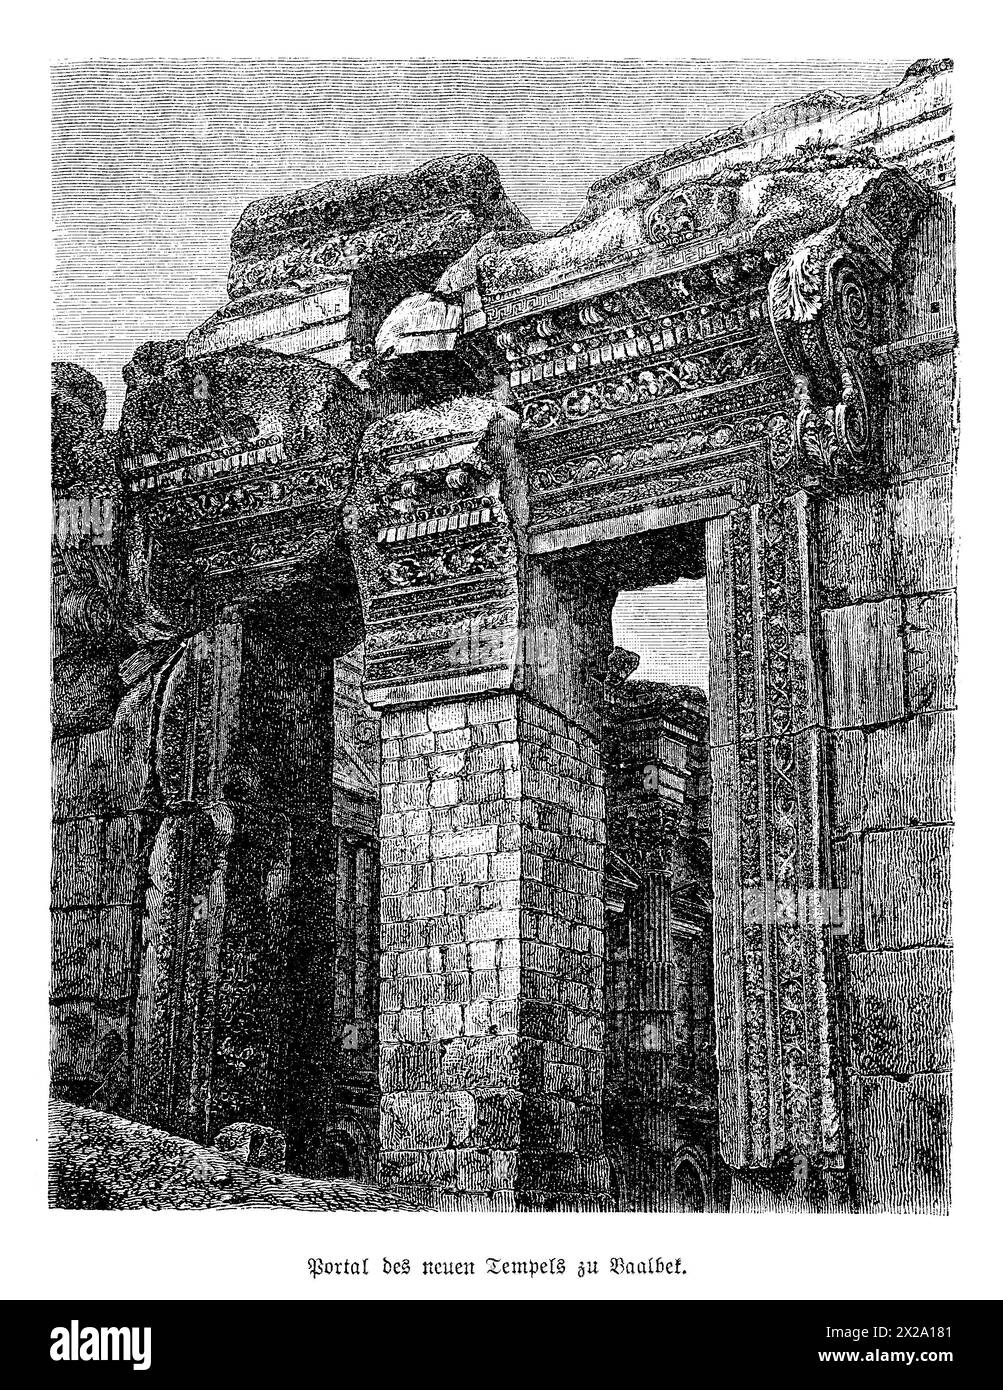 The image captures the awe-inspiring Temple of Baalbek, situated in present-day Lebanon. Known for its monumental scale and exquisite Roman engineering, this archaeological gem features towering columns and intricate stone carvings that have withstood the test of time. The ruins, part of a larger complex originally dedicated to Jupiter, Venus, and Bacchus, reflect the grandiosity and religious significance of the site, making it a pinnacle of Roman architecture in the ancient world. Stock Photo